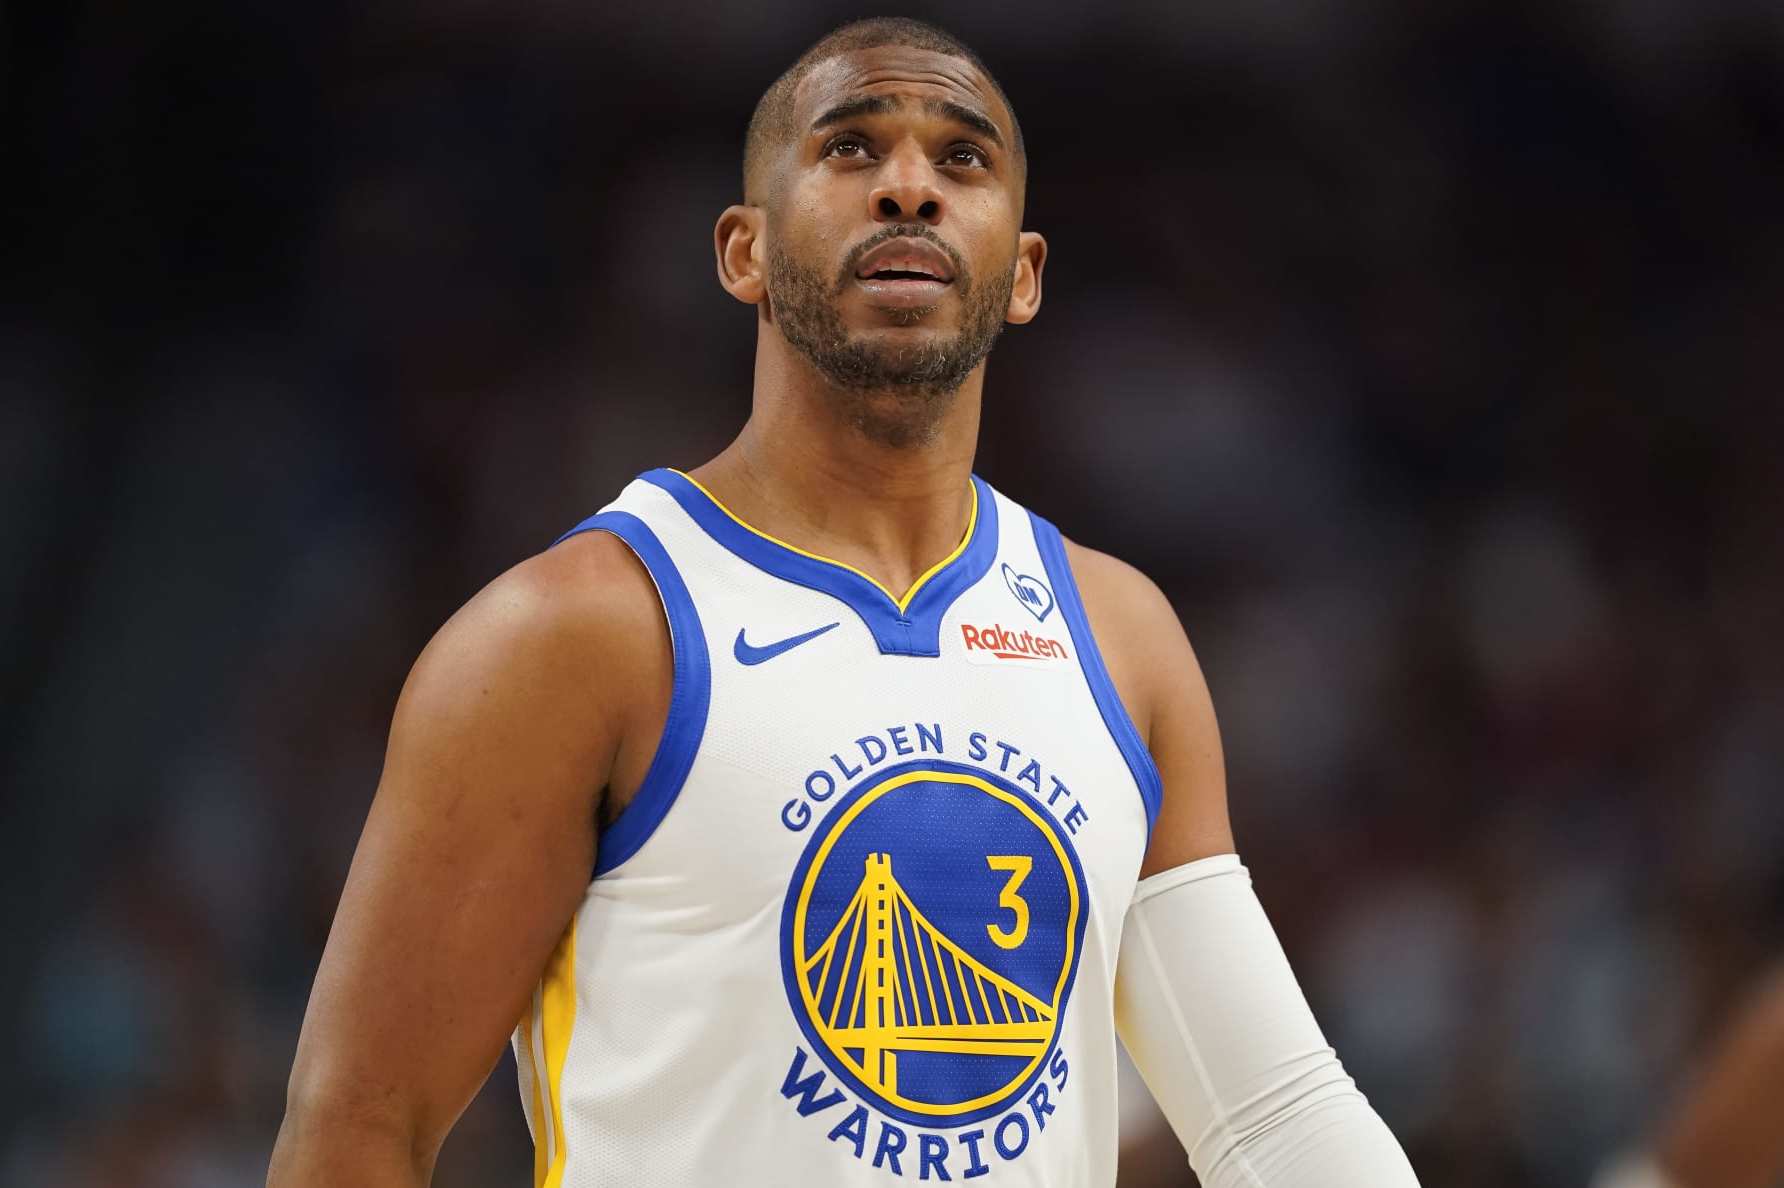 The addition of Chris Paul “might not be unanimous despite the relationship with LeBron”